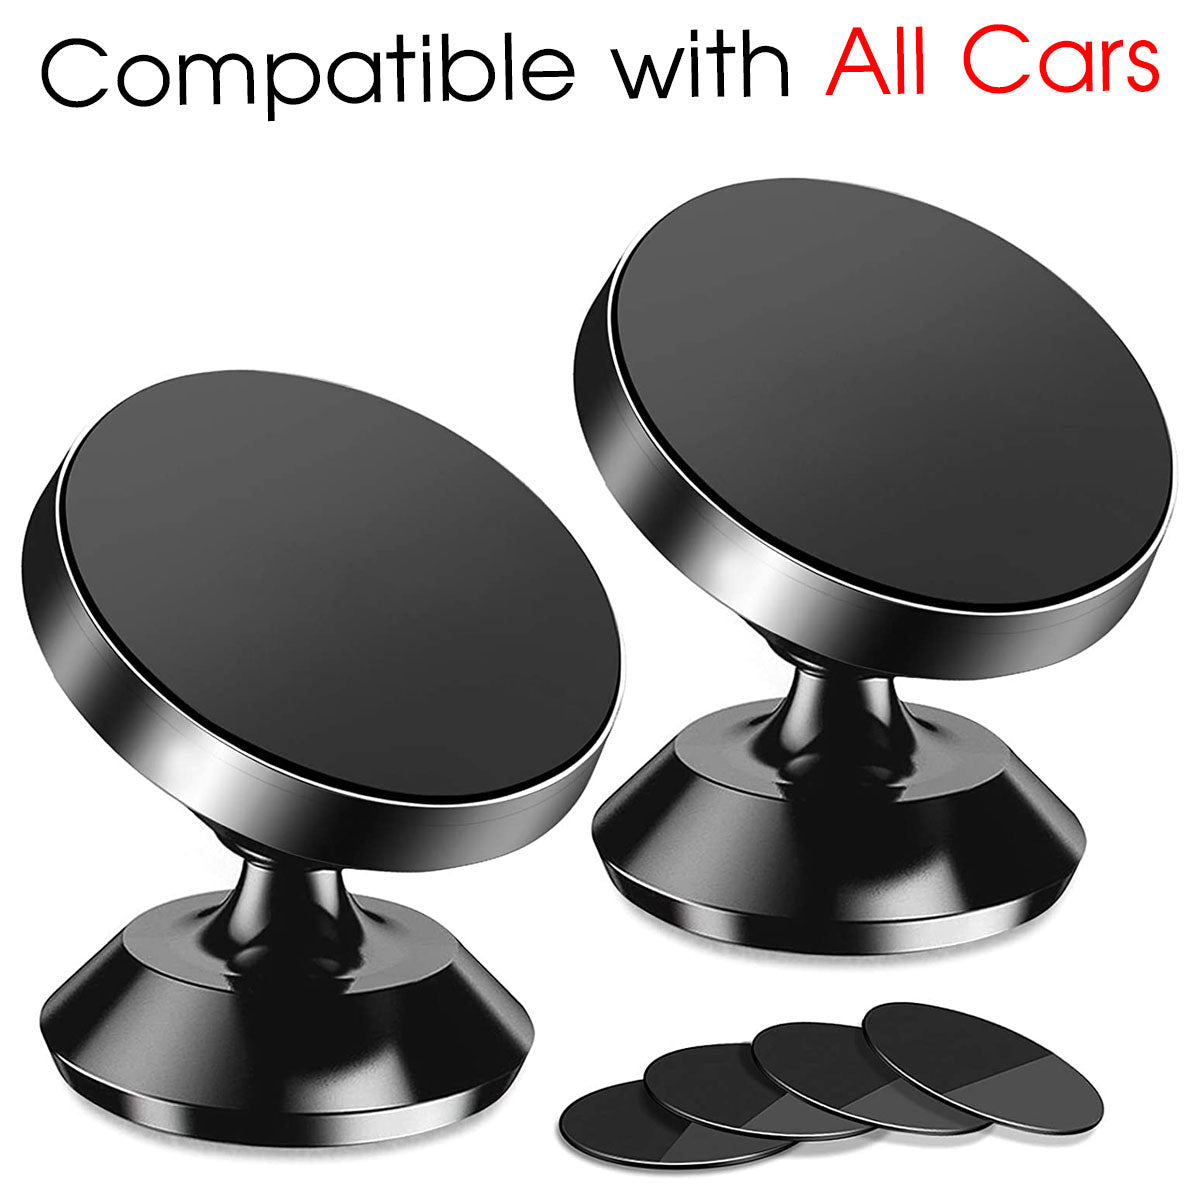 [2 Pack ] Magnetic Phone Mount, Custom For Your Cars, [ Super Strong Magnet ] [ with 4 Metal Plate ] car Magnetic Phone Holder, [ 360° Rotation ] Universal Dashboard car Mount Fits All Cell Phones, Car Accessories MC13982